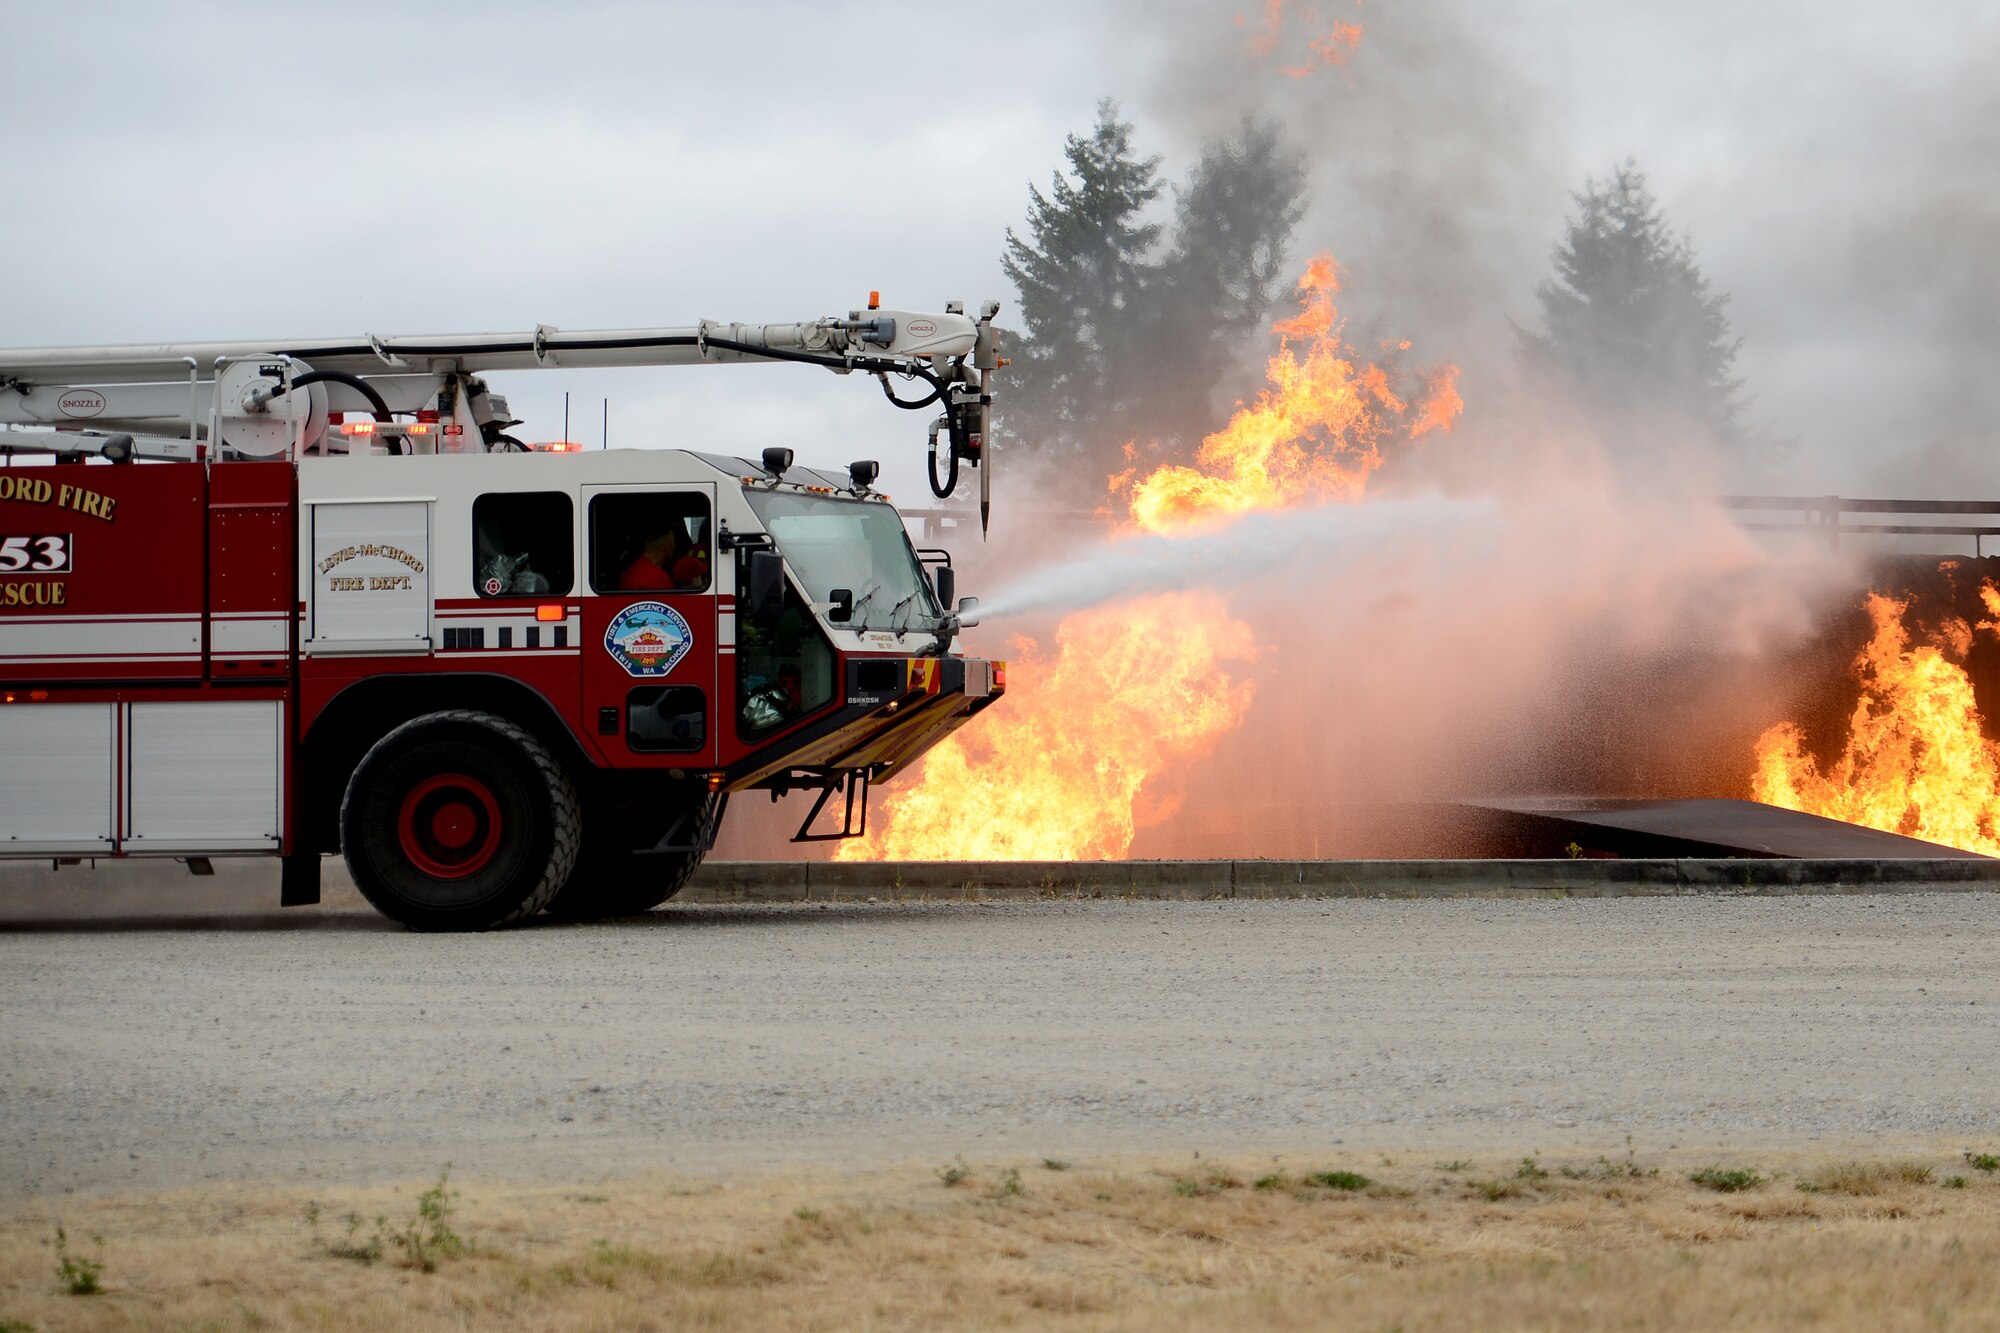 Ewan McFadgen, Pilot for a Day, controls the water hose in a McChord Field fire truck to put out a controlled fire July 10, 2015, during his tour of Joint Base Lewis-McChord, Wash. The Pilot for a Day program gives children affected with a catastrophic illness, on their way to recovery, a tour of JBLM. (U.S. Air Force photo/Airman 1st Class Keoni Chavarria)